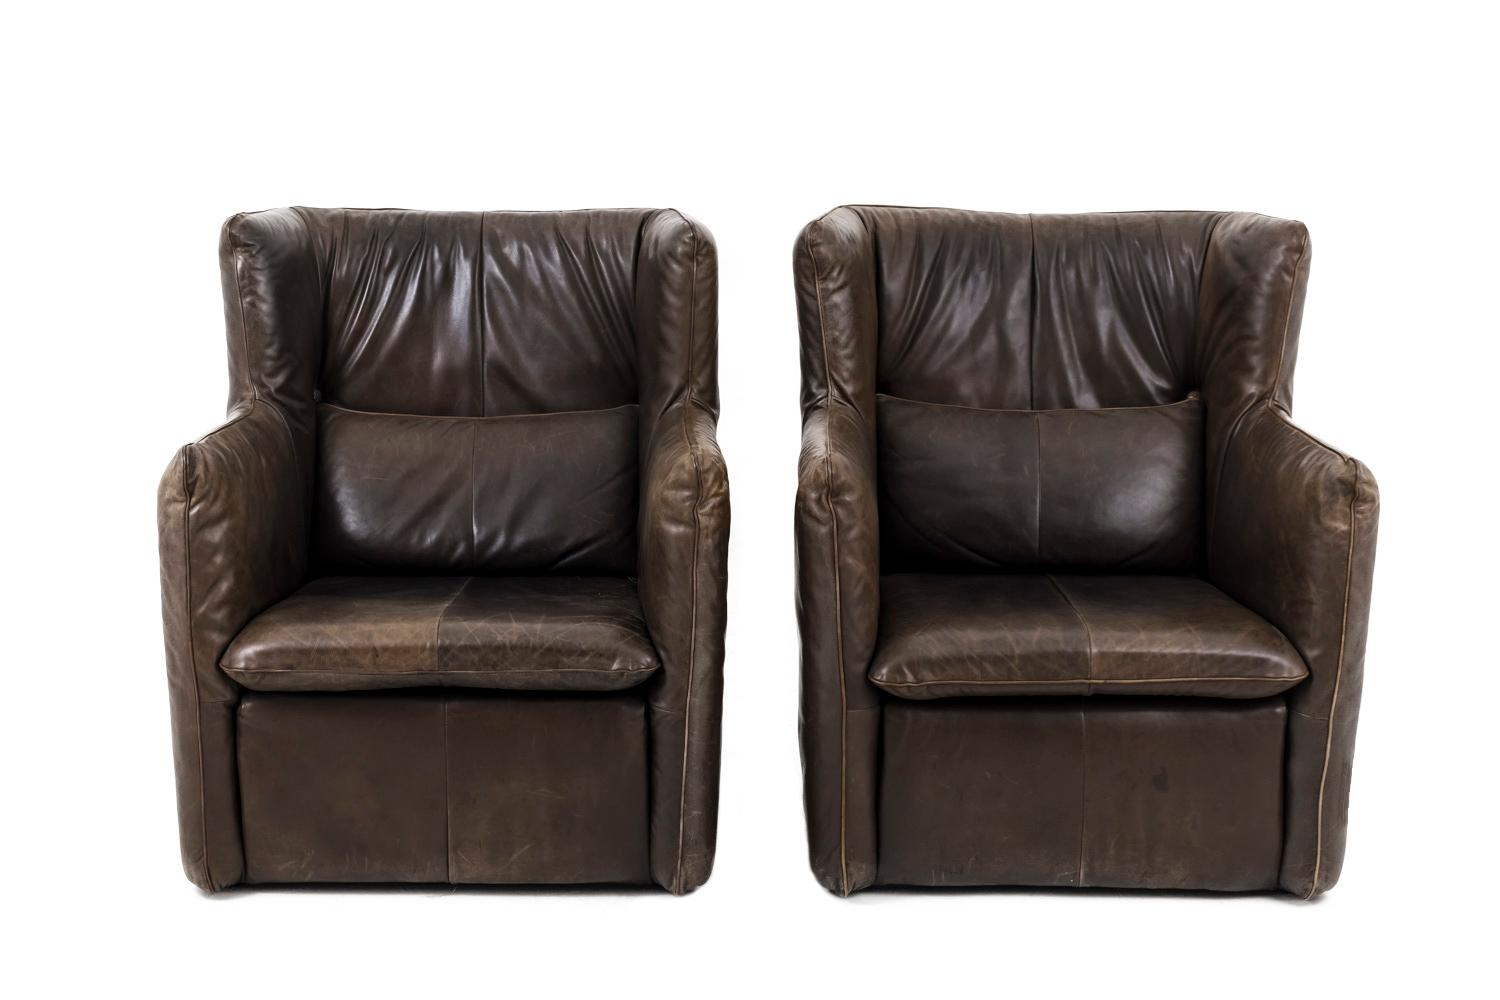 Gerard Van Den Berg for Montis, sticker.

Pair of armchairs in brown leather with a full Stand covered by leather. They were framed by two full arms rising in a head support on both sides and forming a unique piece with the back seat, adorned with